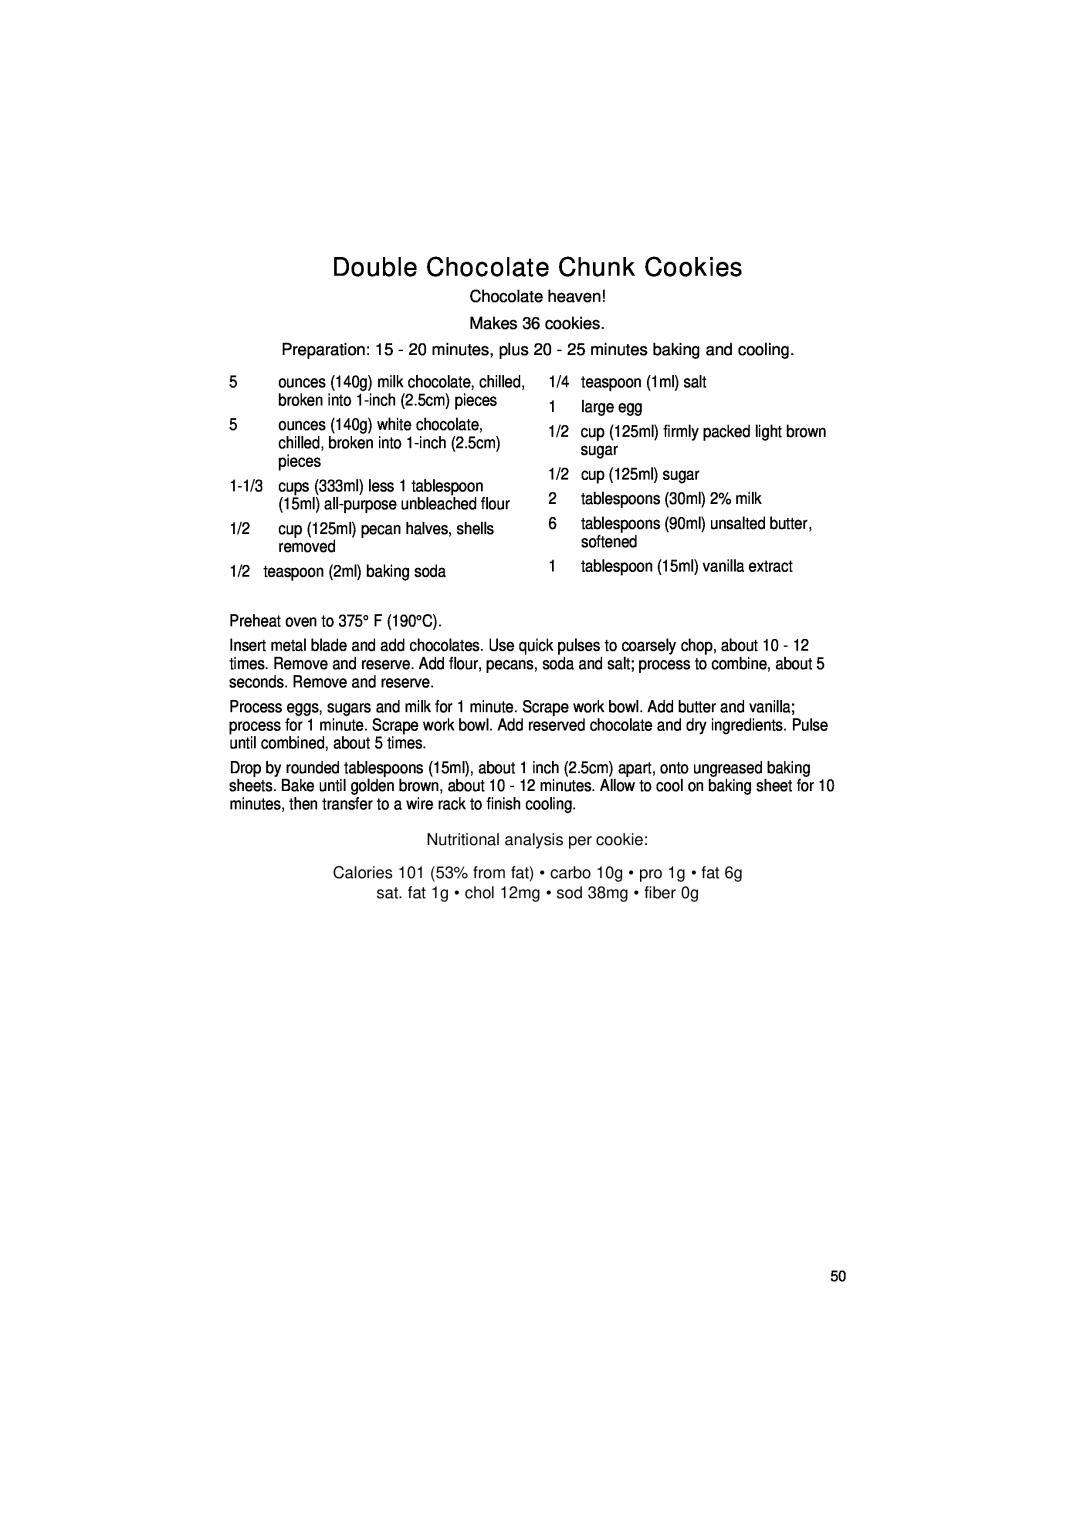 Cuisinart DLC-2011C Double Chocolate Chunk Cookies, 1-1/3 cups 333ml less 1 tablespoon 15ml all-purpose unbleached flour 